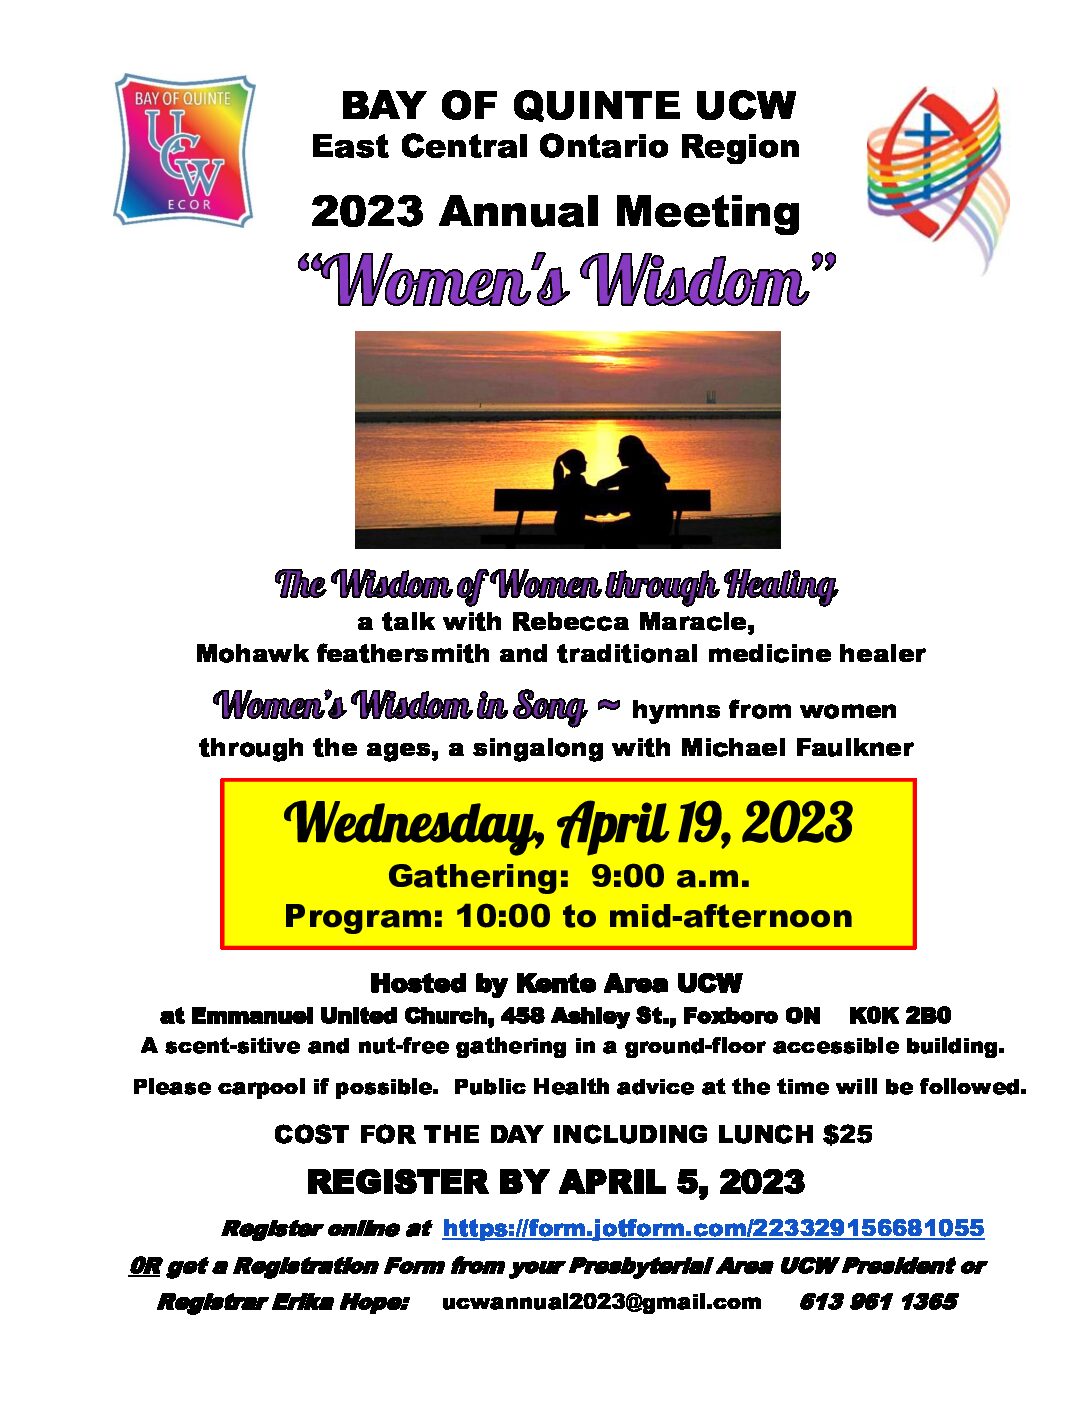 BAY OF QUINTE UCW East Central Ontario Region 2023 Annual Meeting